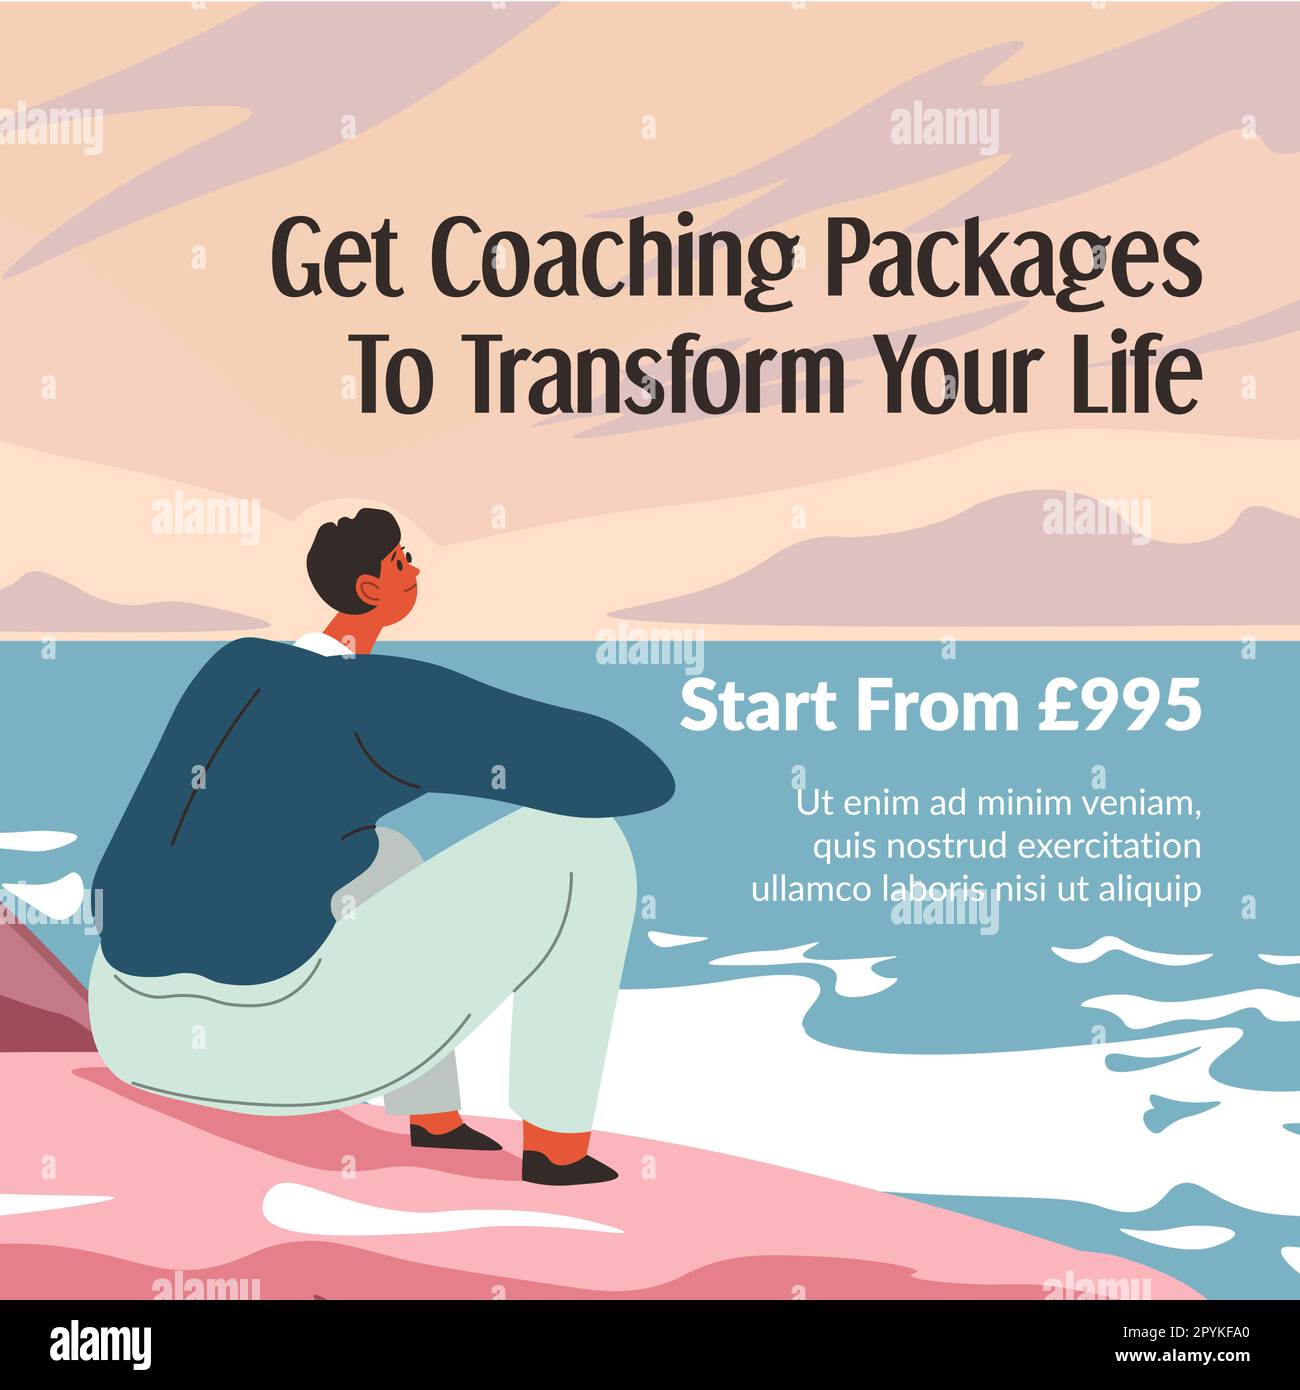 Get coaching package to transform your life banner Stock Vector